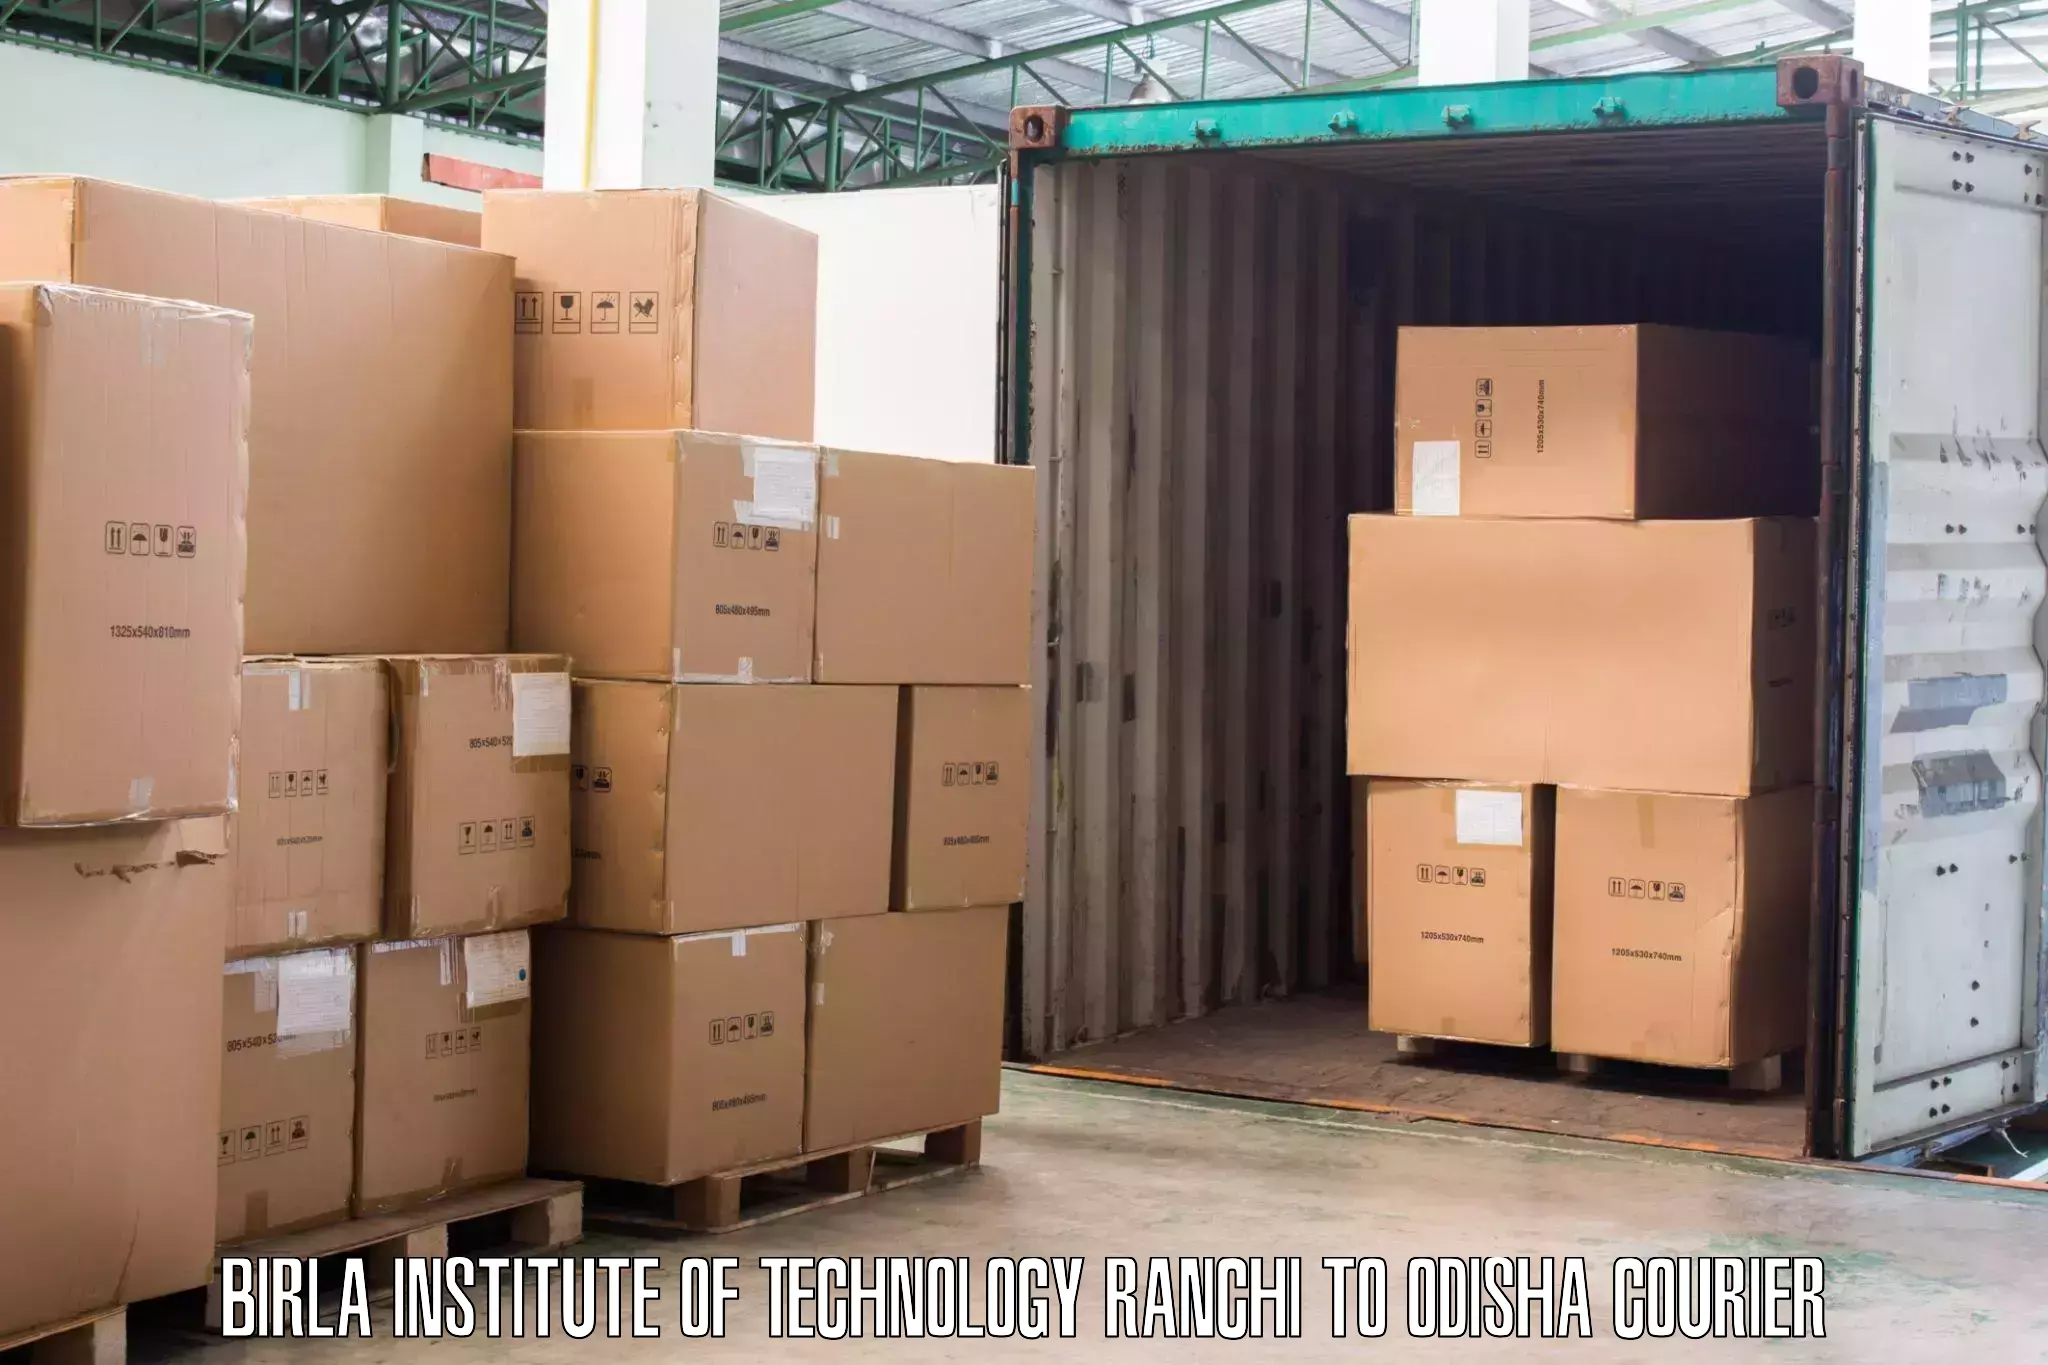 Doorstep moving services in Birla Institute of Technology Ranchi to Odisha